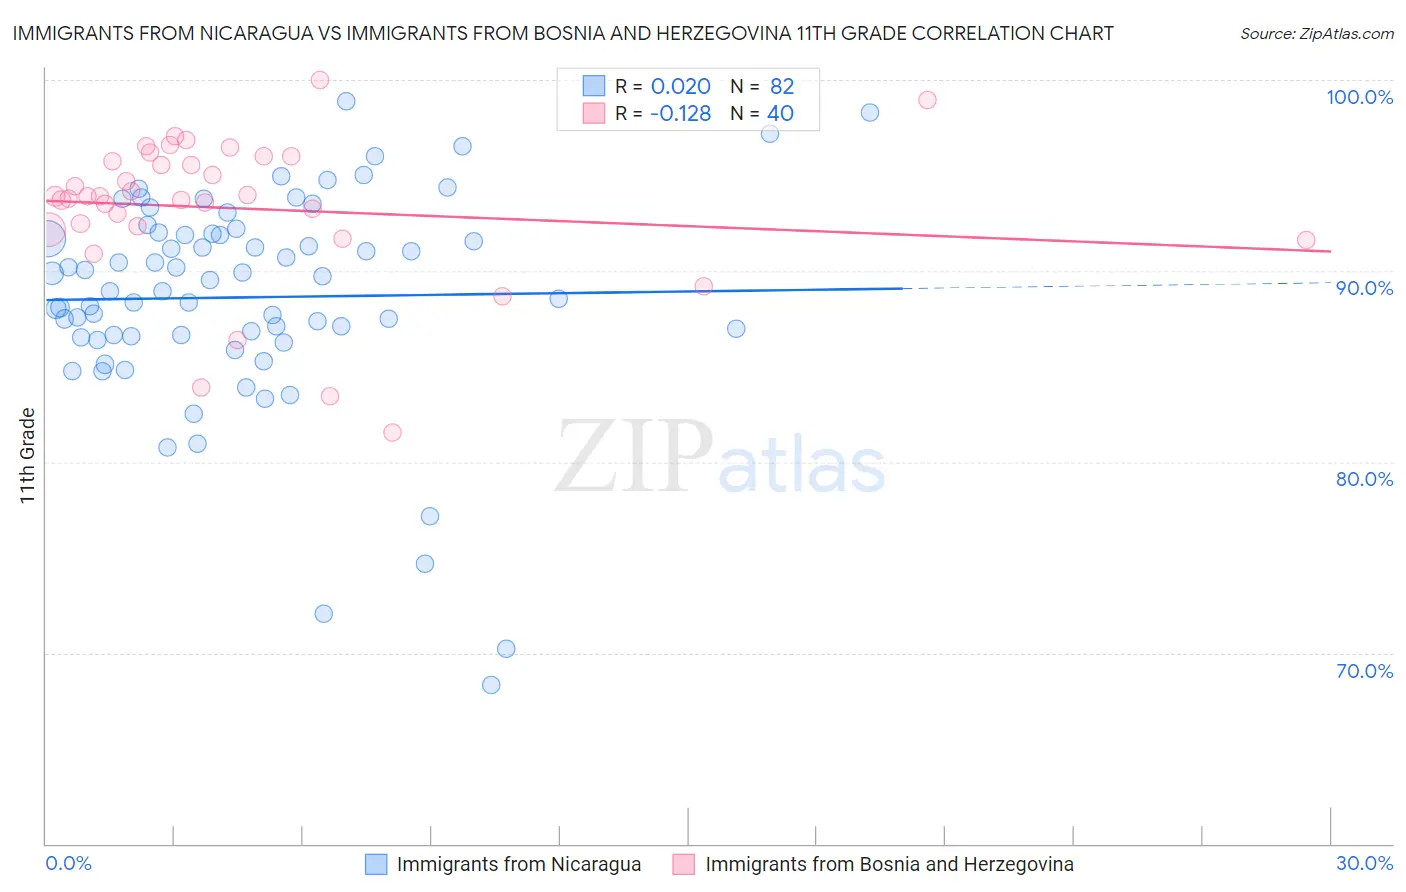 Immigrants from Nicaragua vs Immigrants from Bosnia and Herzegovina 11th Grade